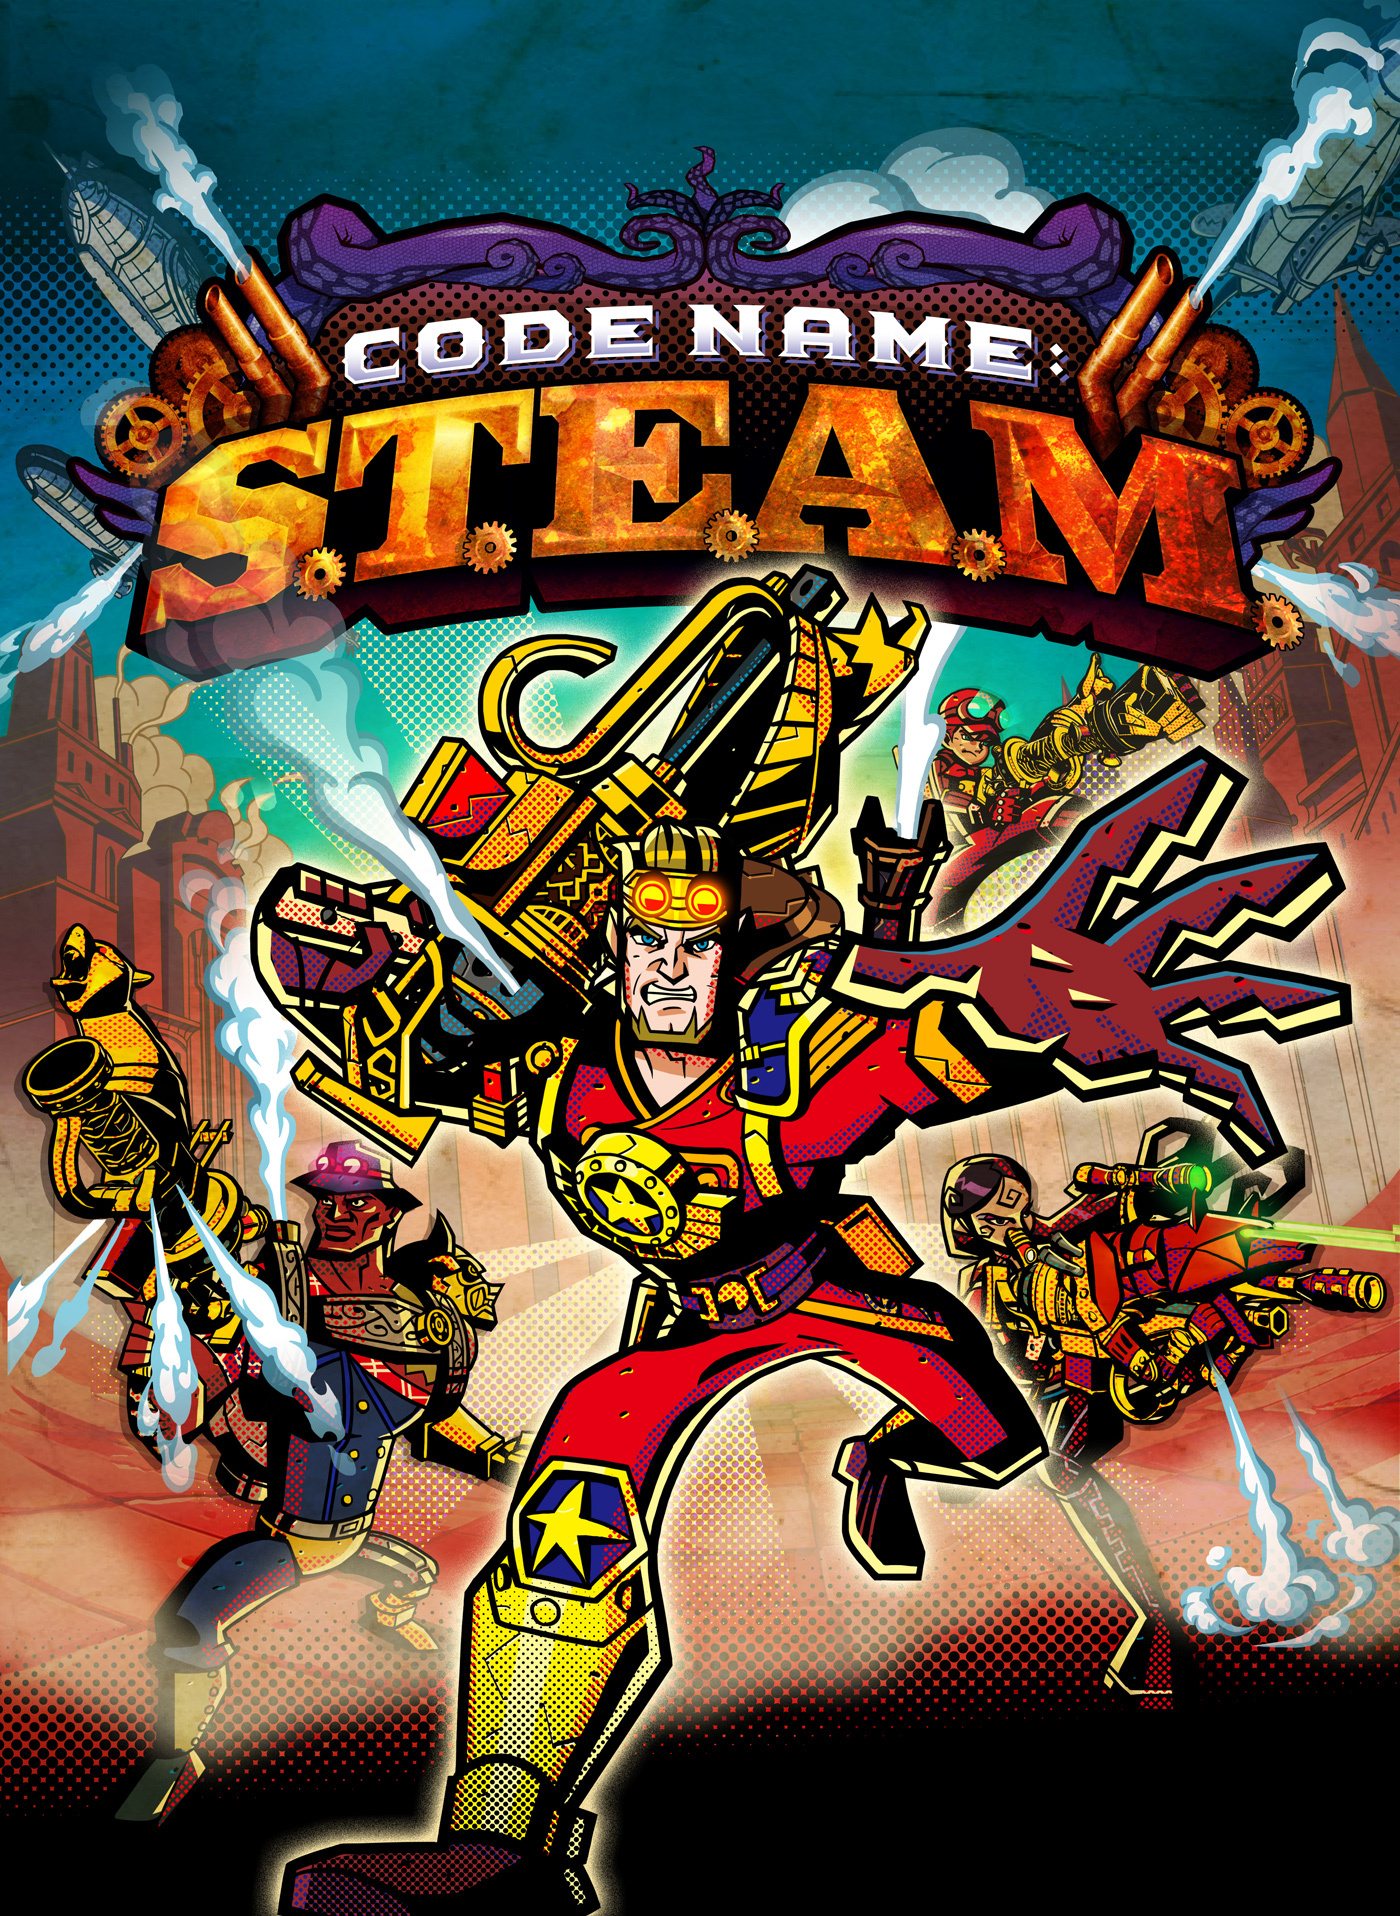 Nintendo reveals Code Name: S.T.E.A.M. for 3DS from Advance Wars studio